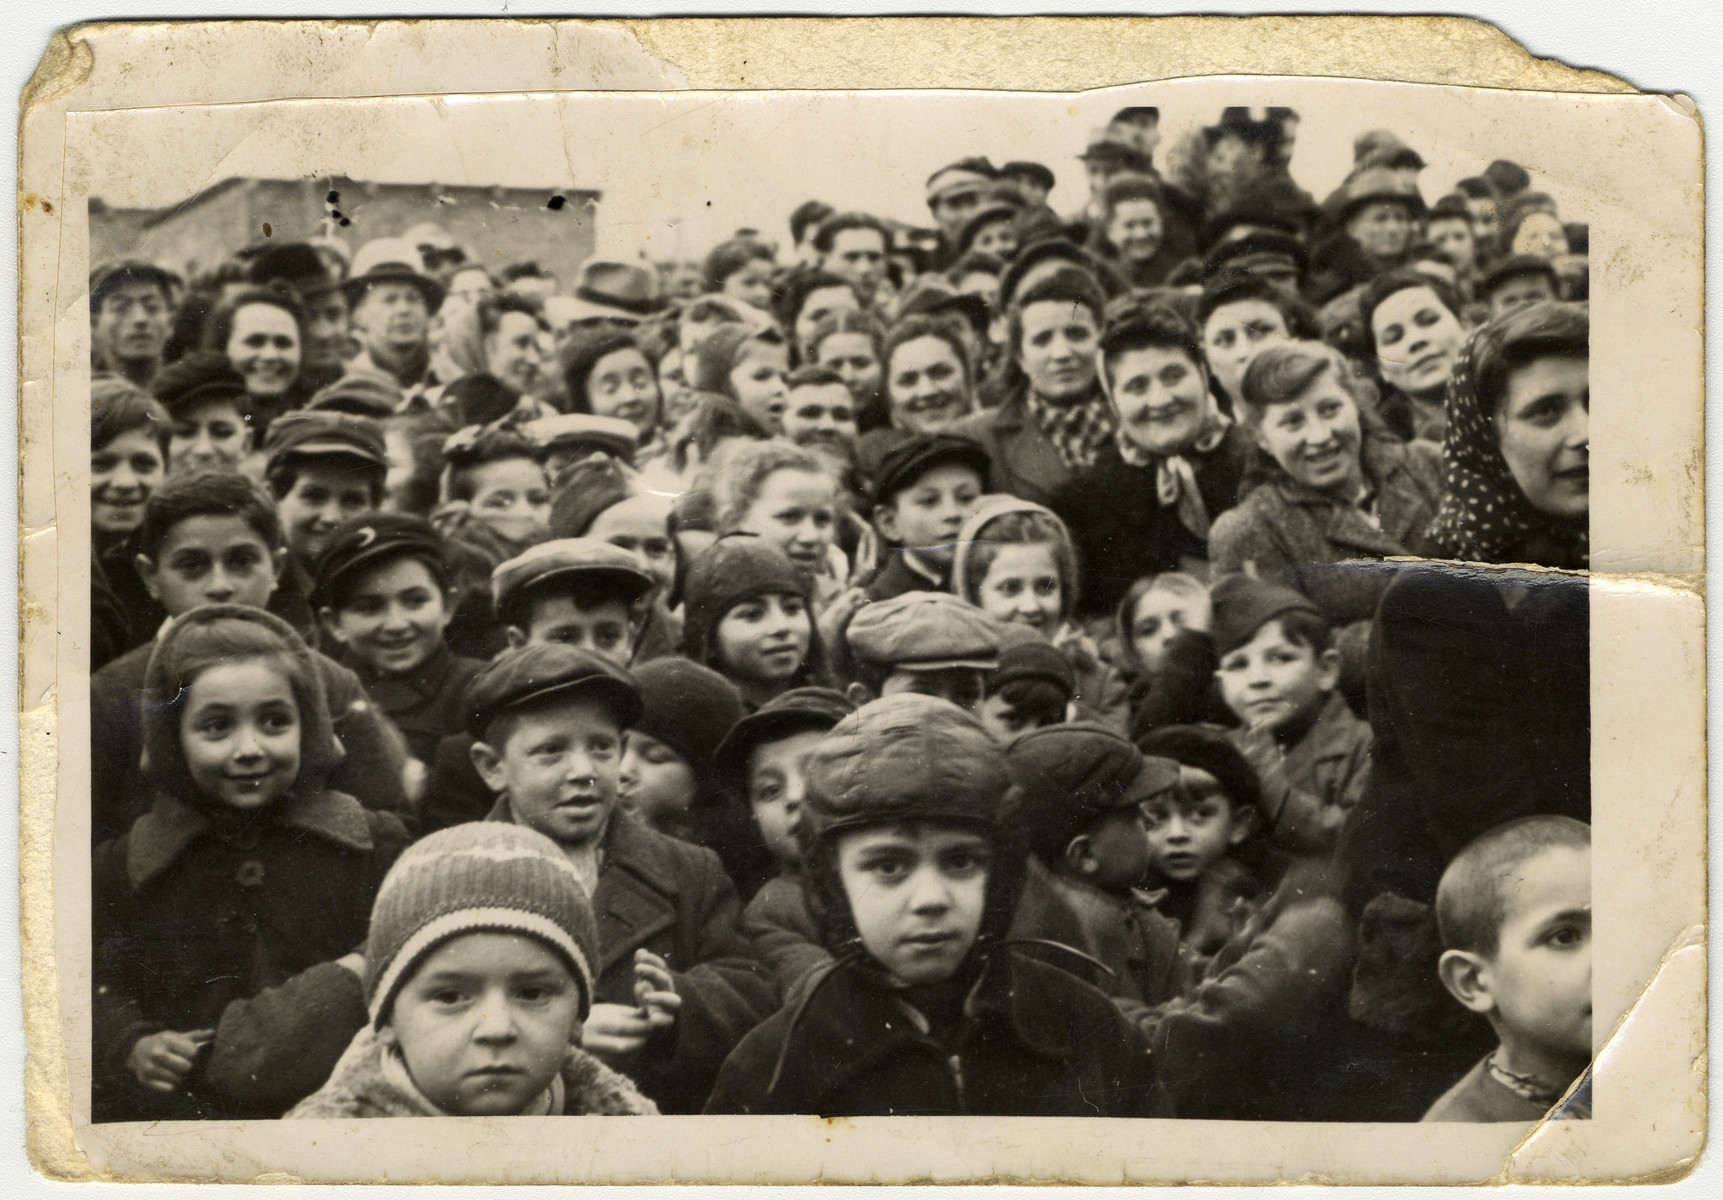 A large group of children and adults crowds together in the Zeilsheim displaced persons' camp.

Henik Minuskin is at the bottom, wearing a Russian pilot's hat.